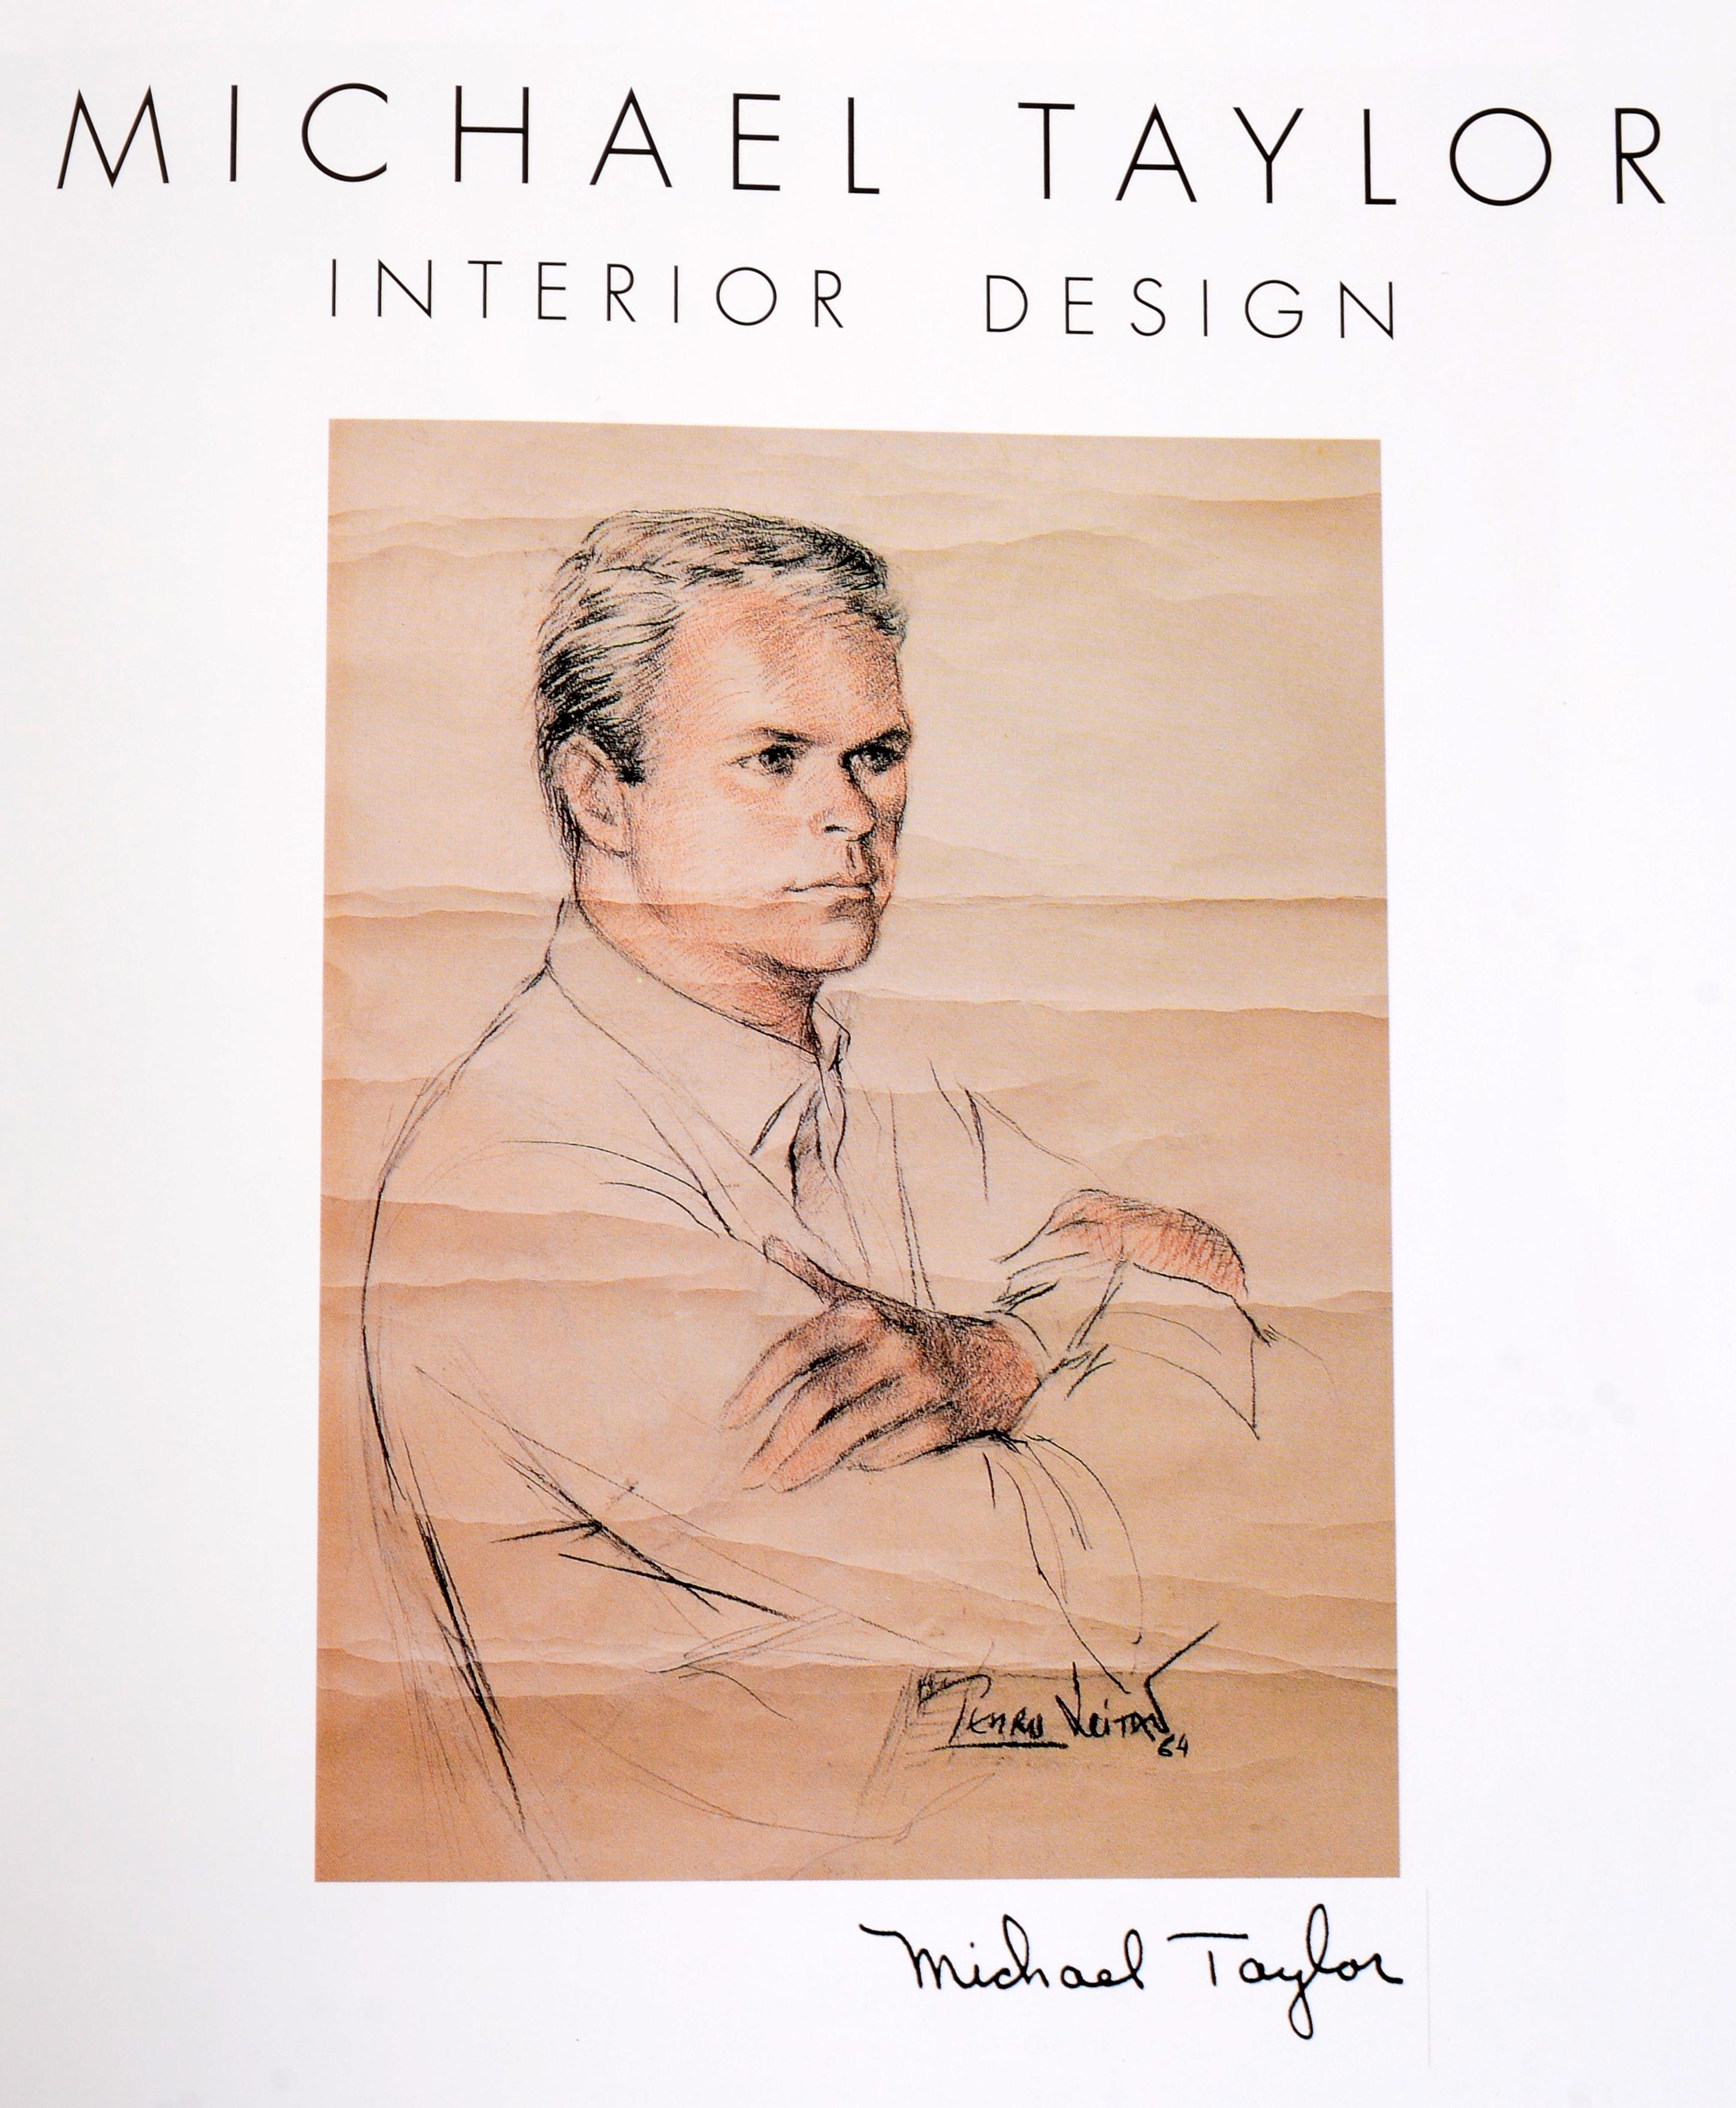 Michael Taylor: Interior Design by Stephen M. Salny. Publisher W. W. Norton & Company, 2009. Stated 1st Ed hardcover with dust jacket. Signed and inscribed by the author. Michael Taylor (born Earnest Charles Taylor, January 30, 1927 – June 3, 1986)